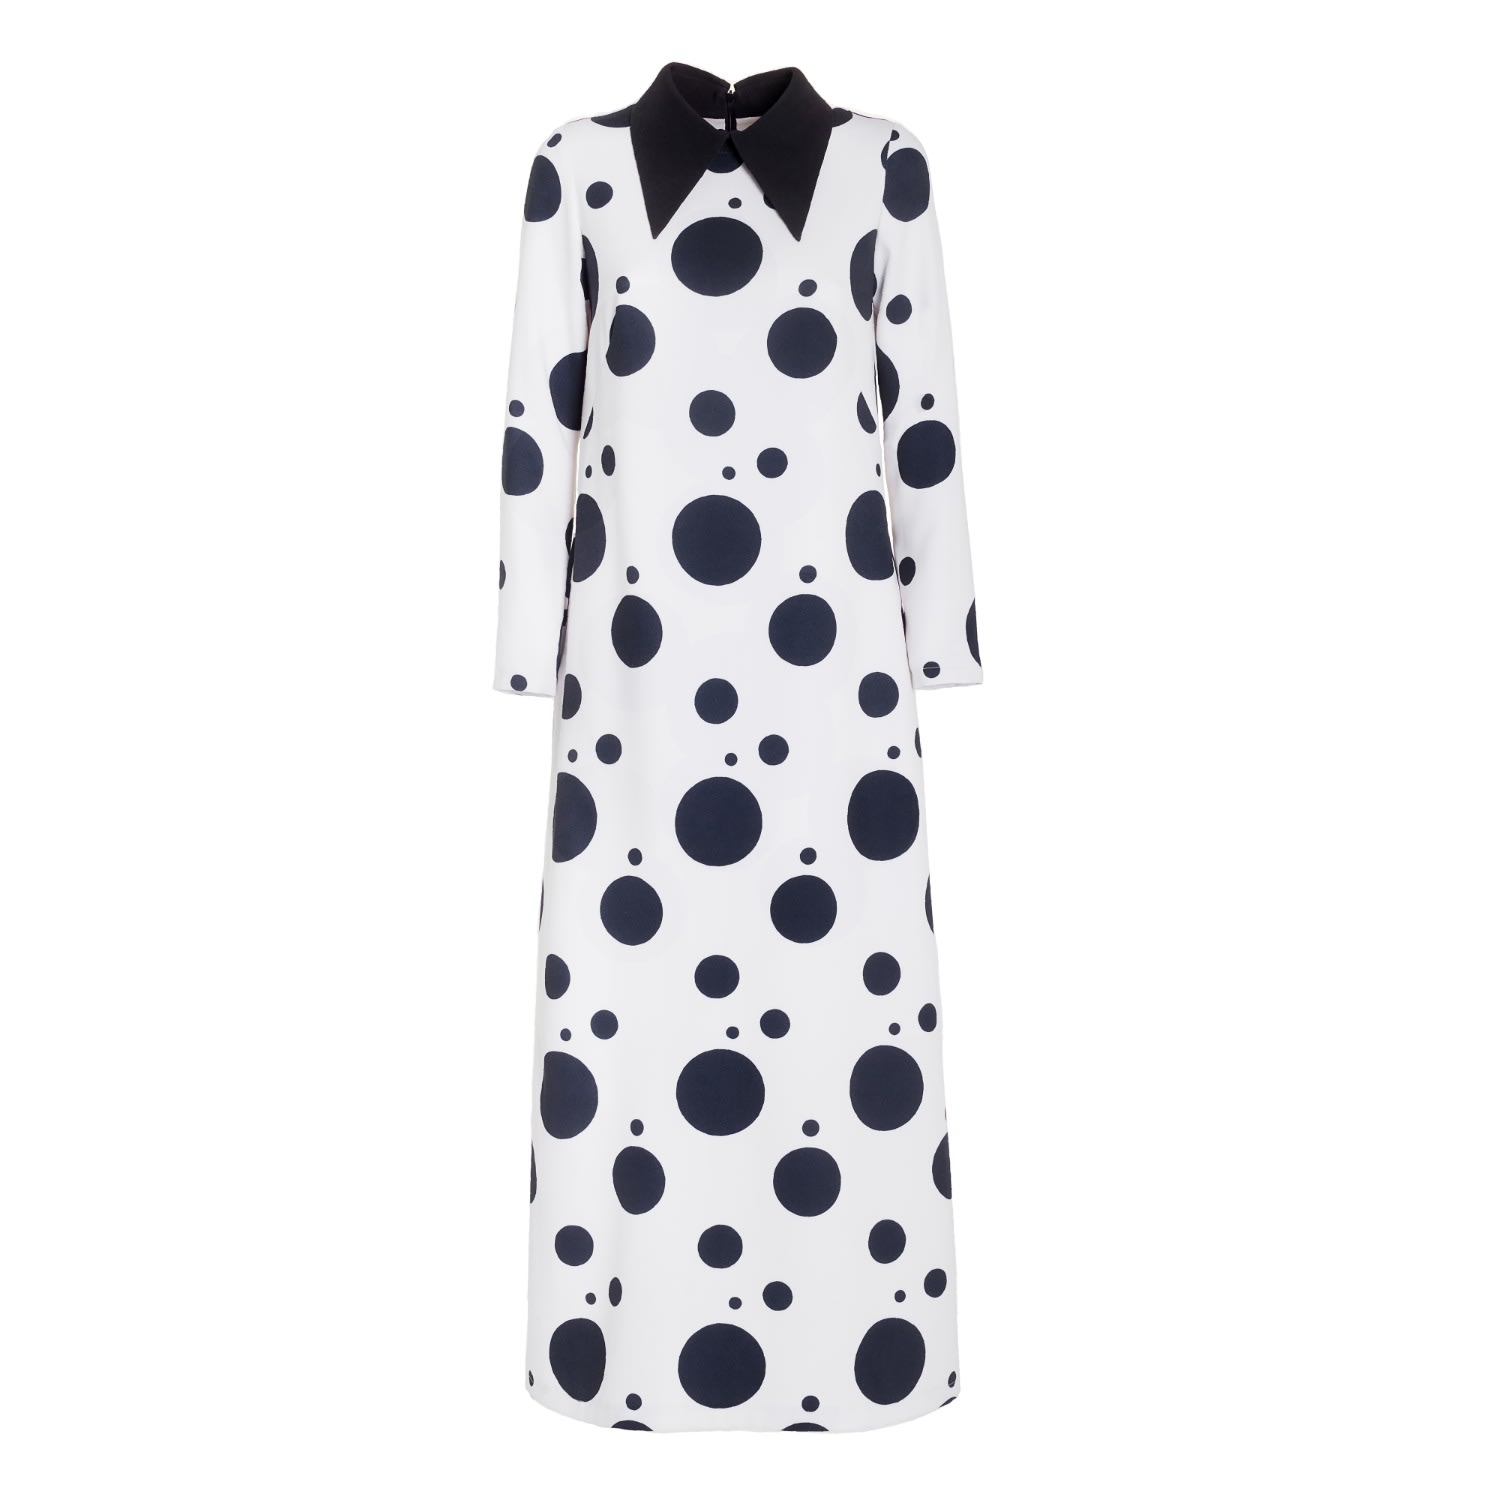 Women’s Polka Dot Dress With Stand Collar White Extra Large Julia Allert